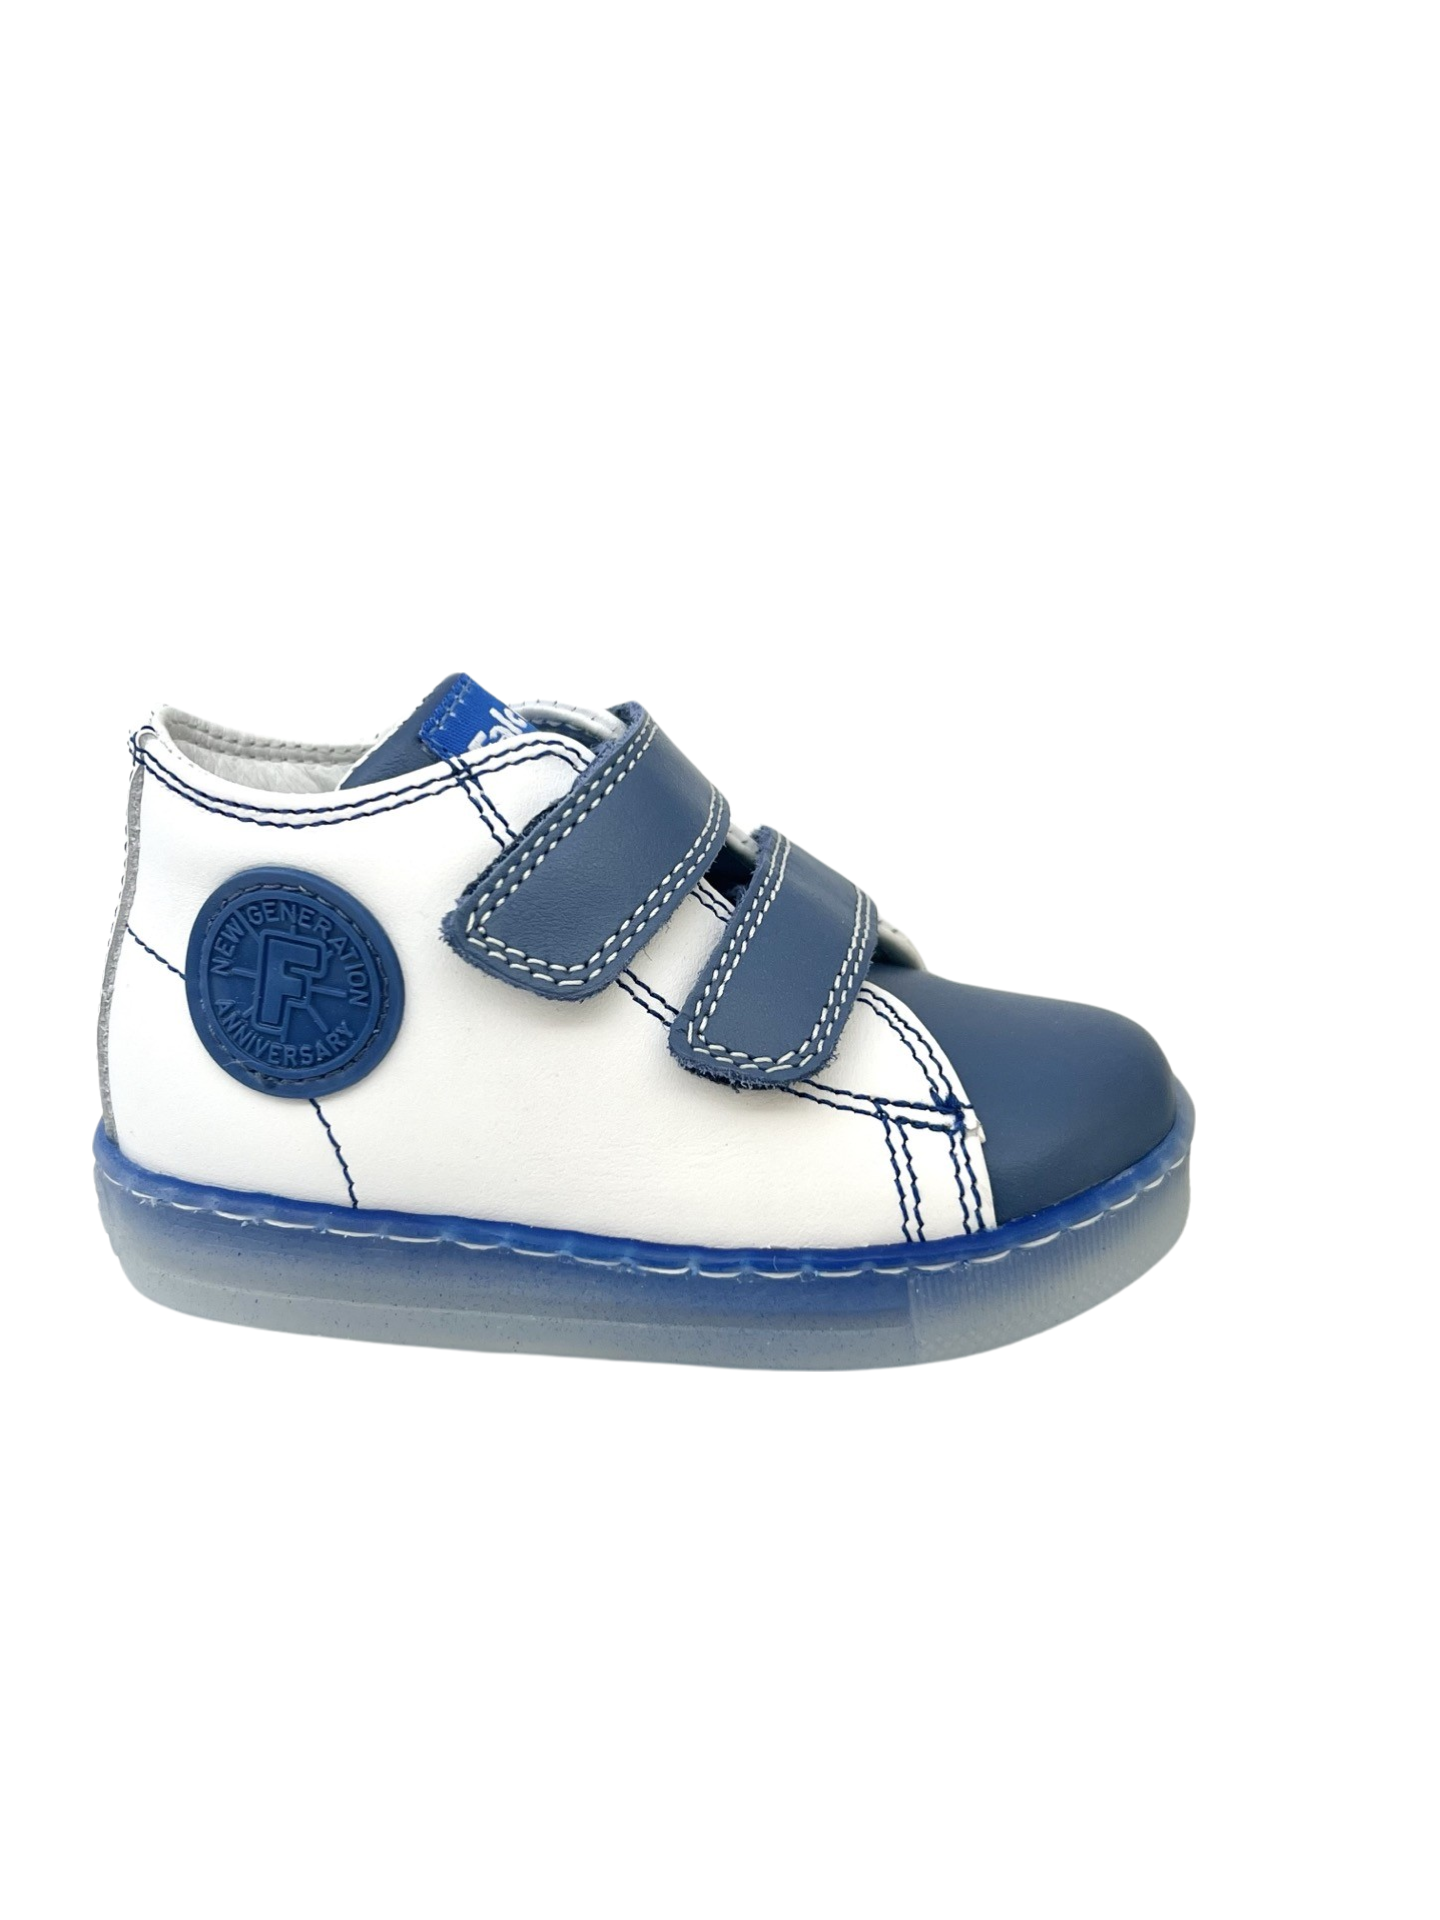 Falcotto White/Blue Pebbled Baby Sneaker - Michael